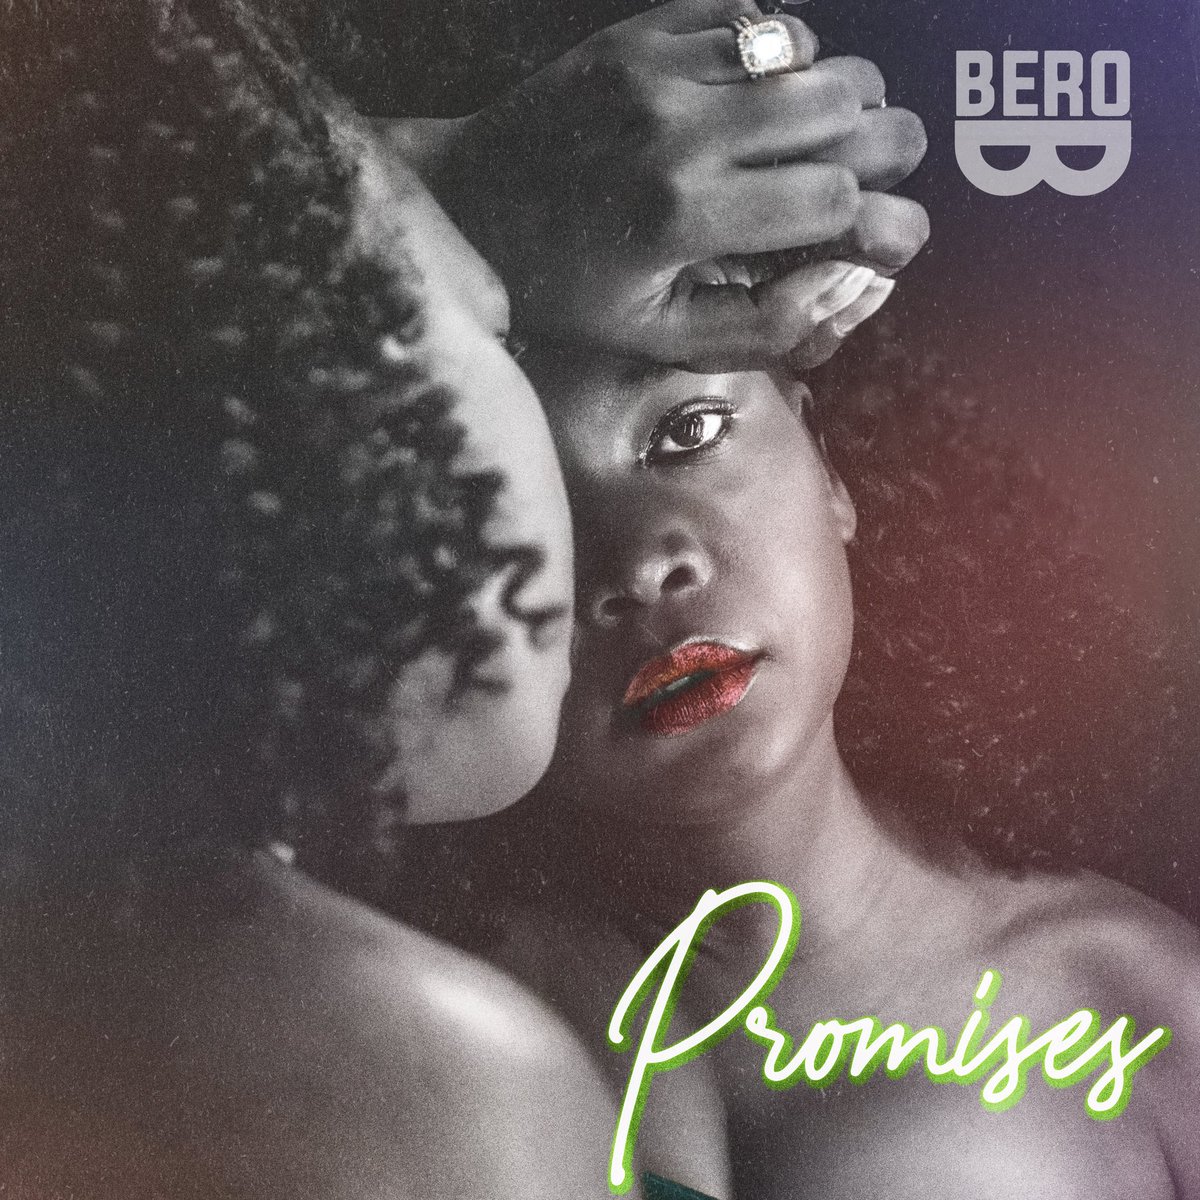 8 days to promises 💃🏾💃🏾💃🏾💃🏾 , 
tap the link in bio 🤗🤗. #promises #newsinglecomingsoon